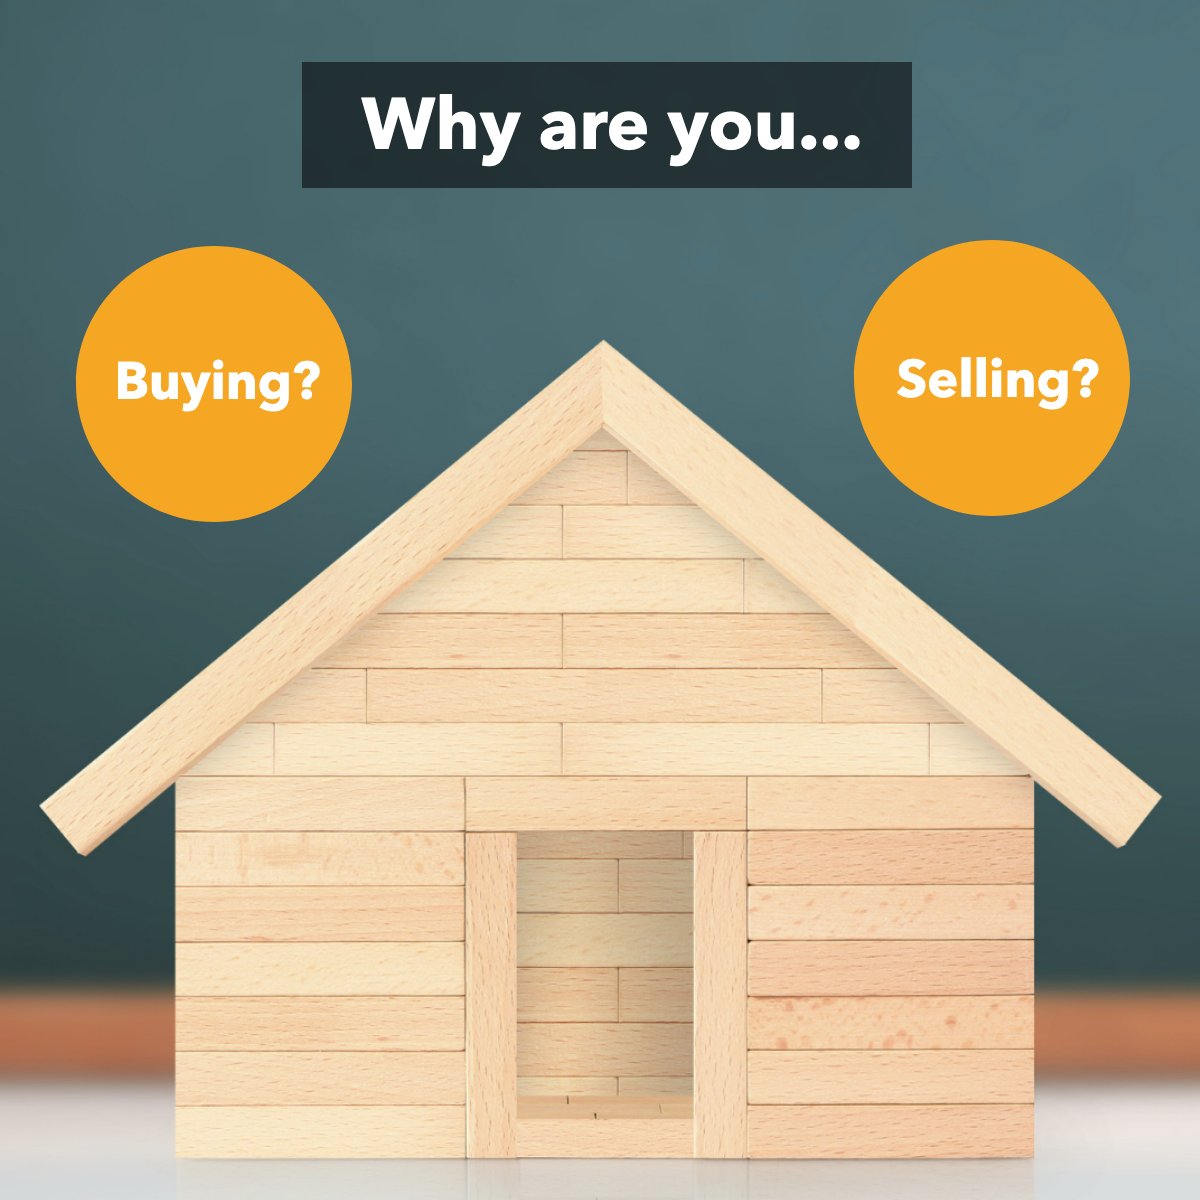 What's your next step 👣? Tell us in the comments! 💭 #buying #selling #buyingorselling #question #cherylcitro